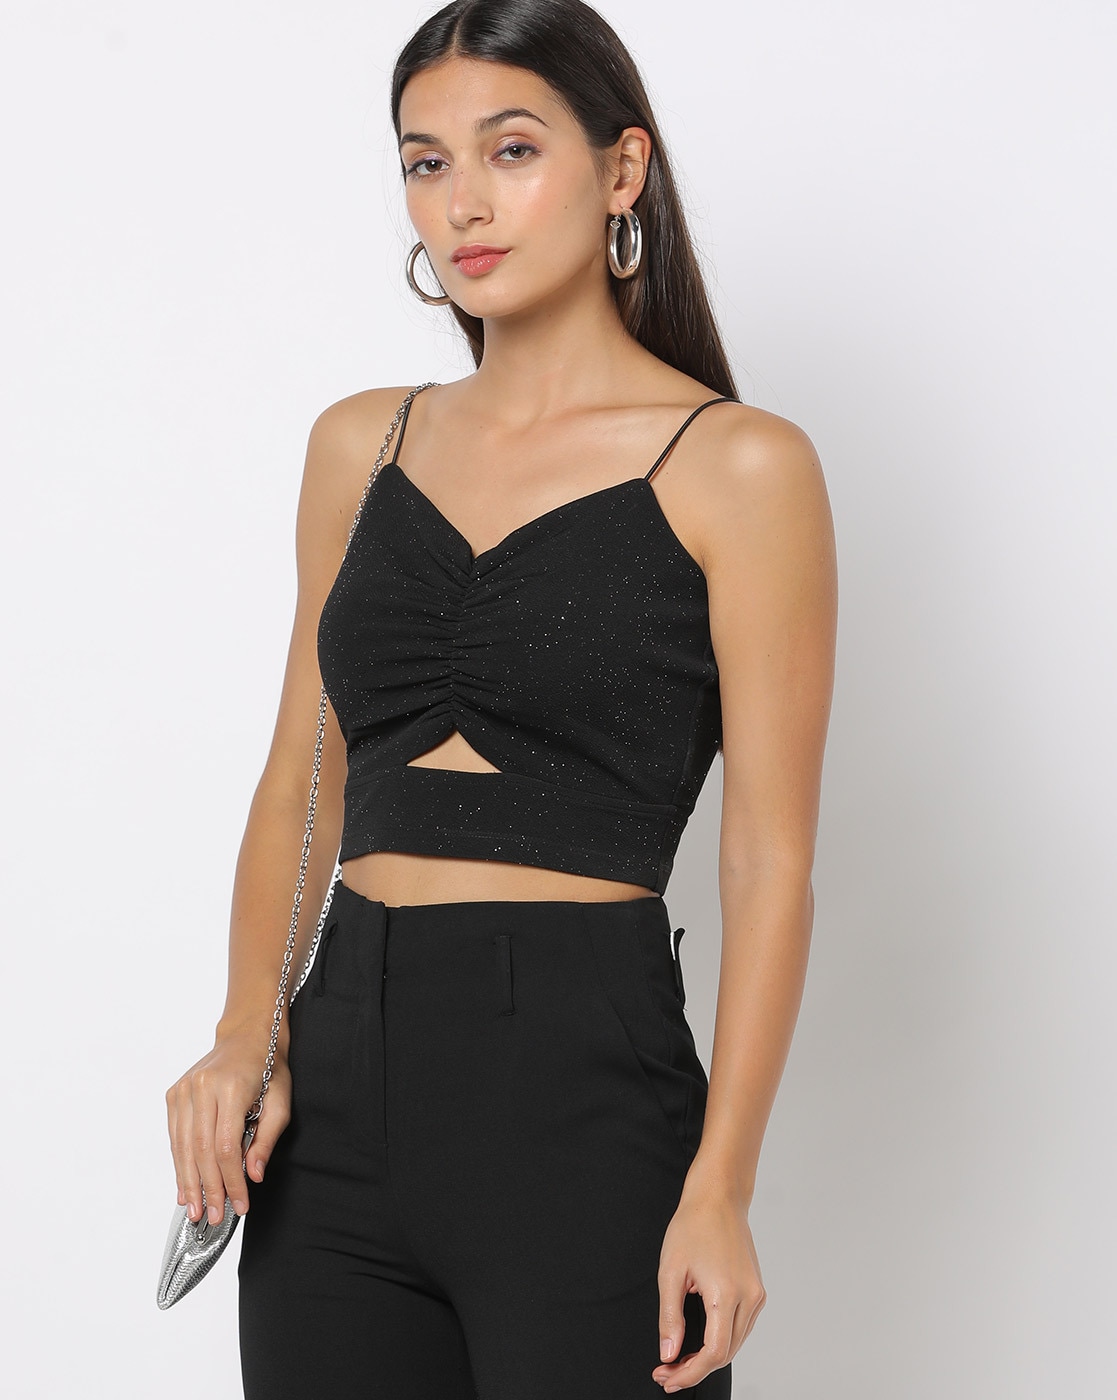 Women's Black Ruched Cut Out Top, Char